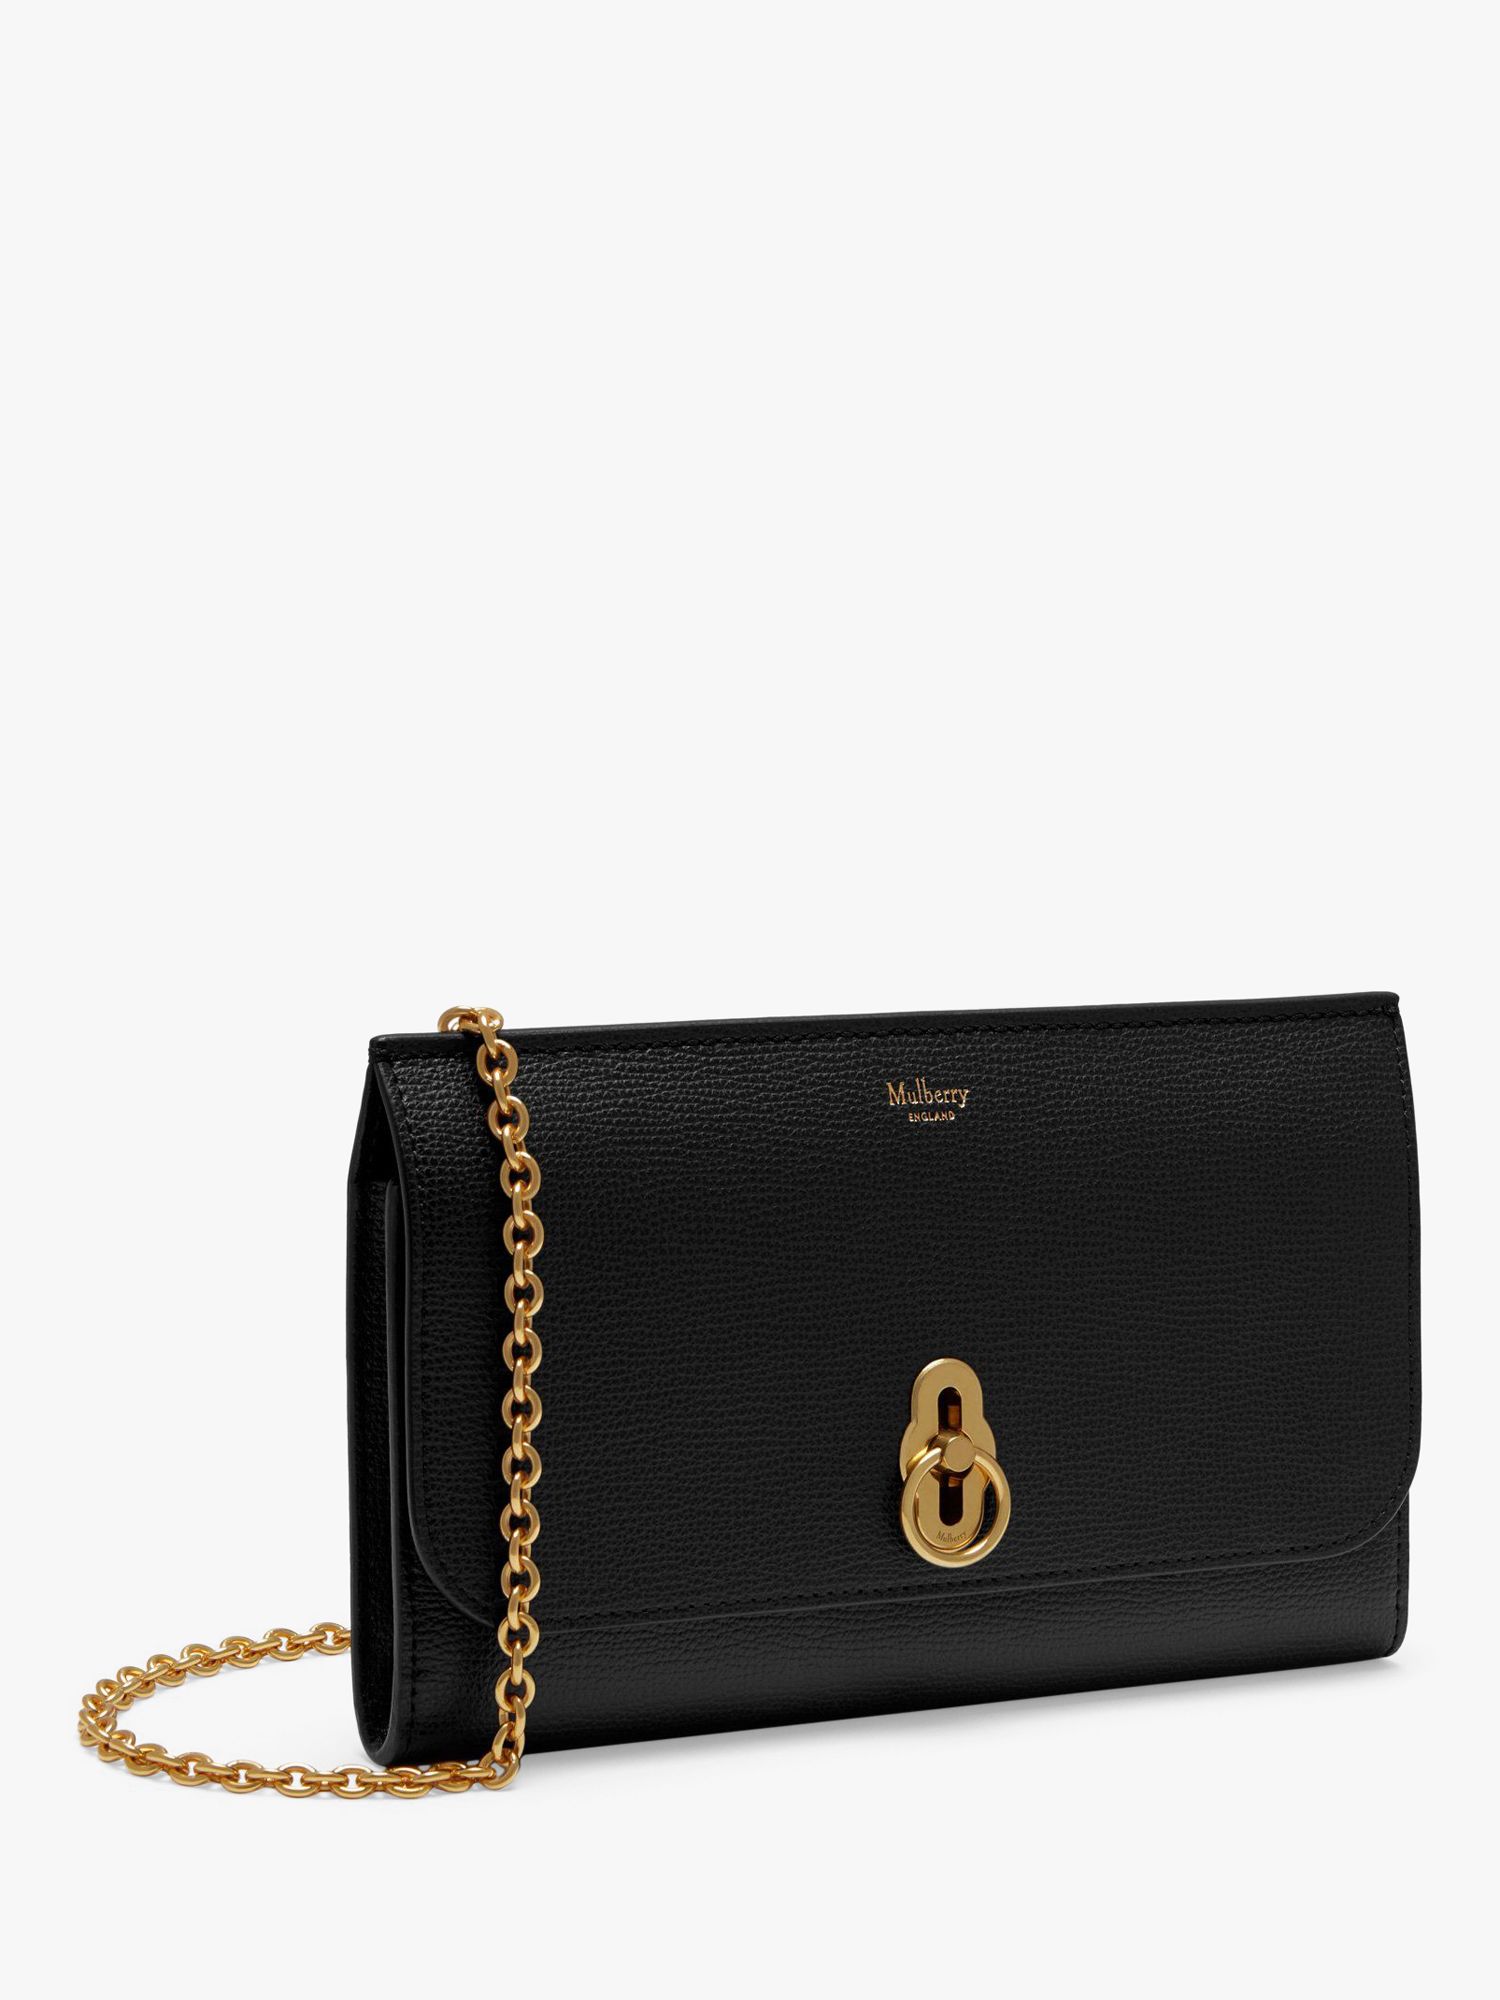 Mulberry Amberley Small Classic Grain Leather Clutch Bag, Black